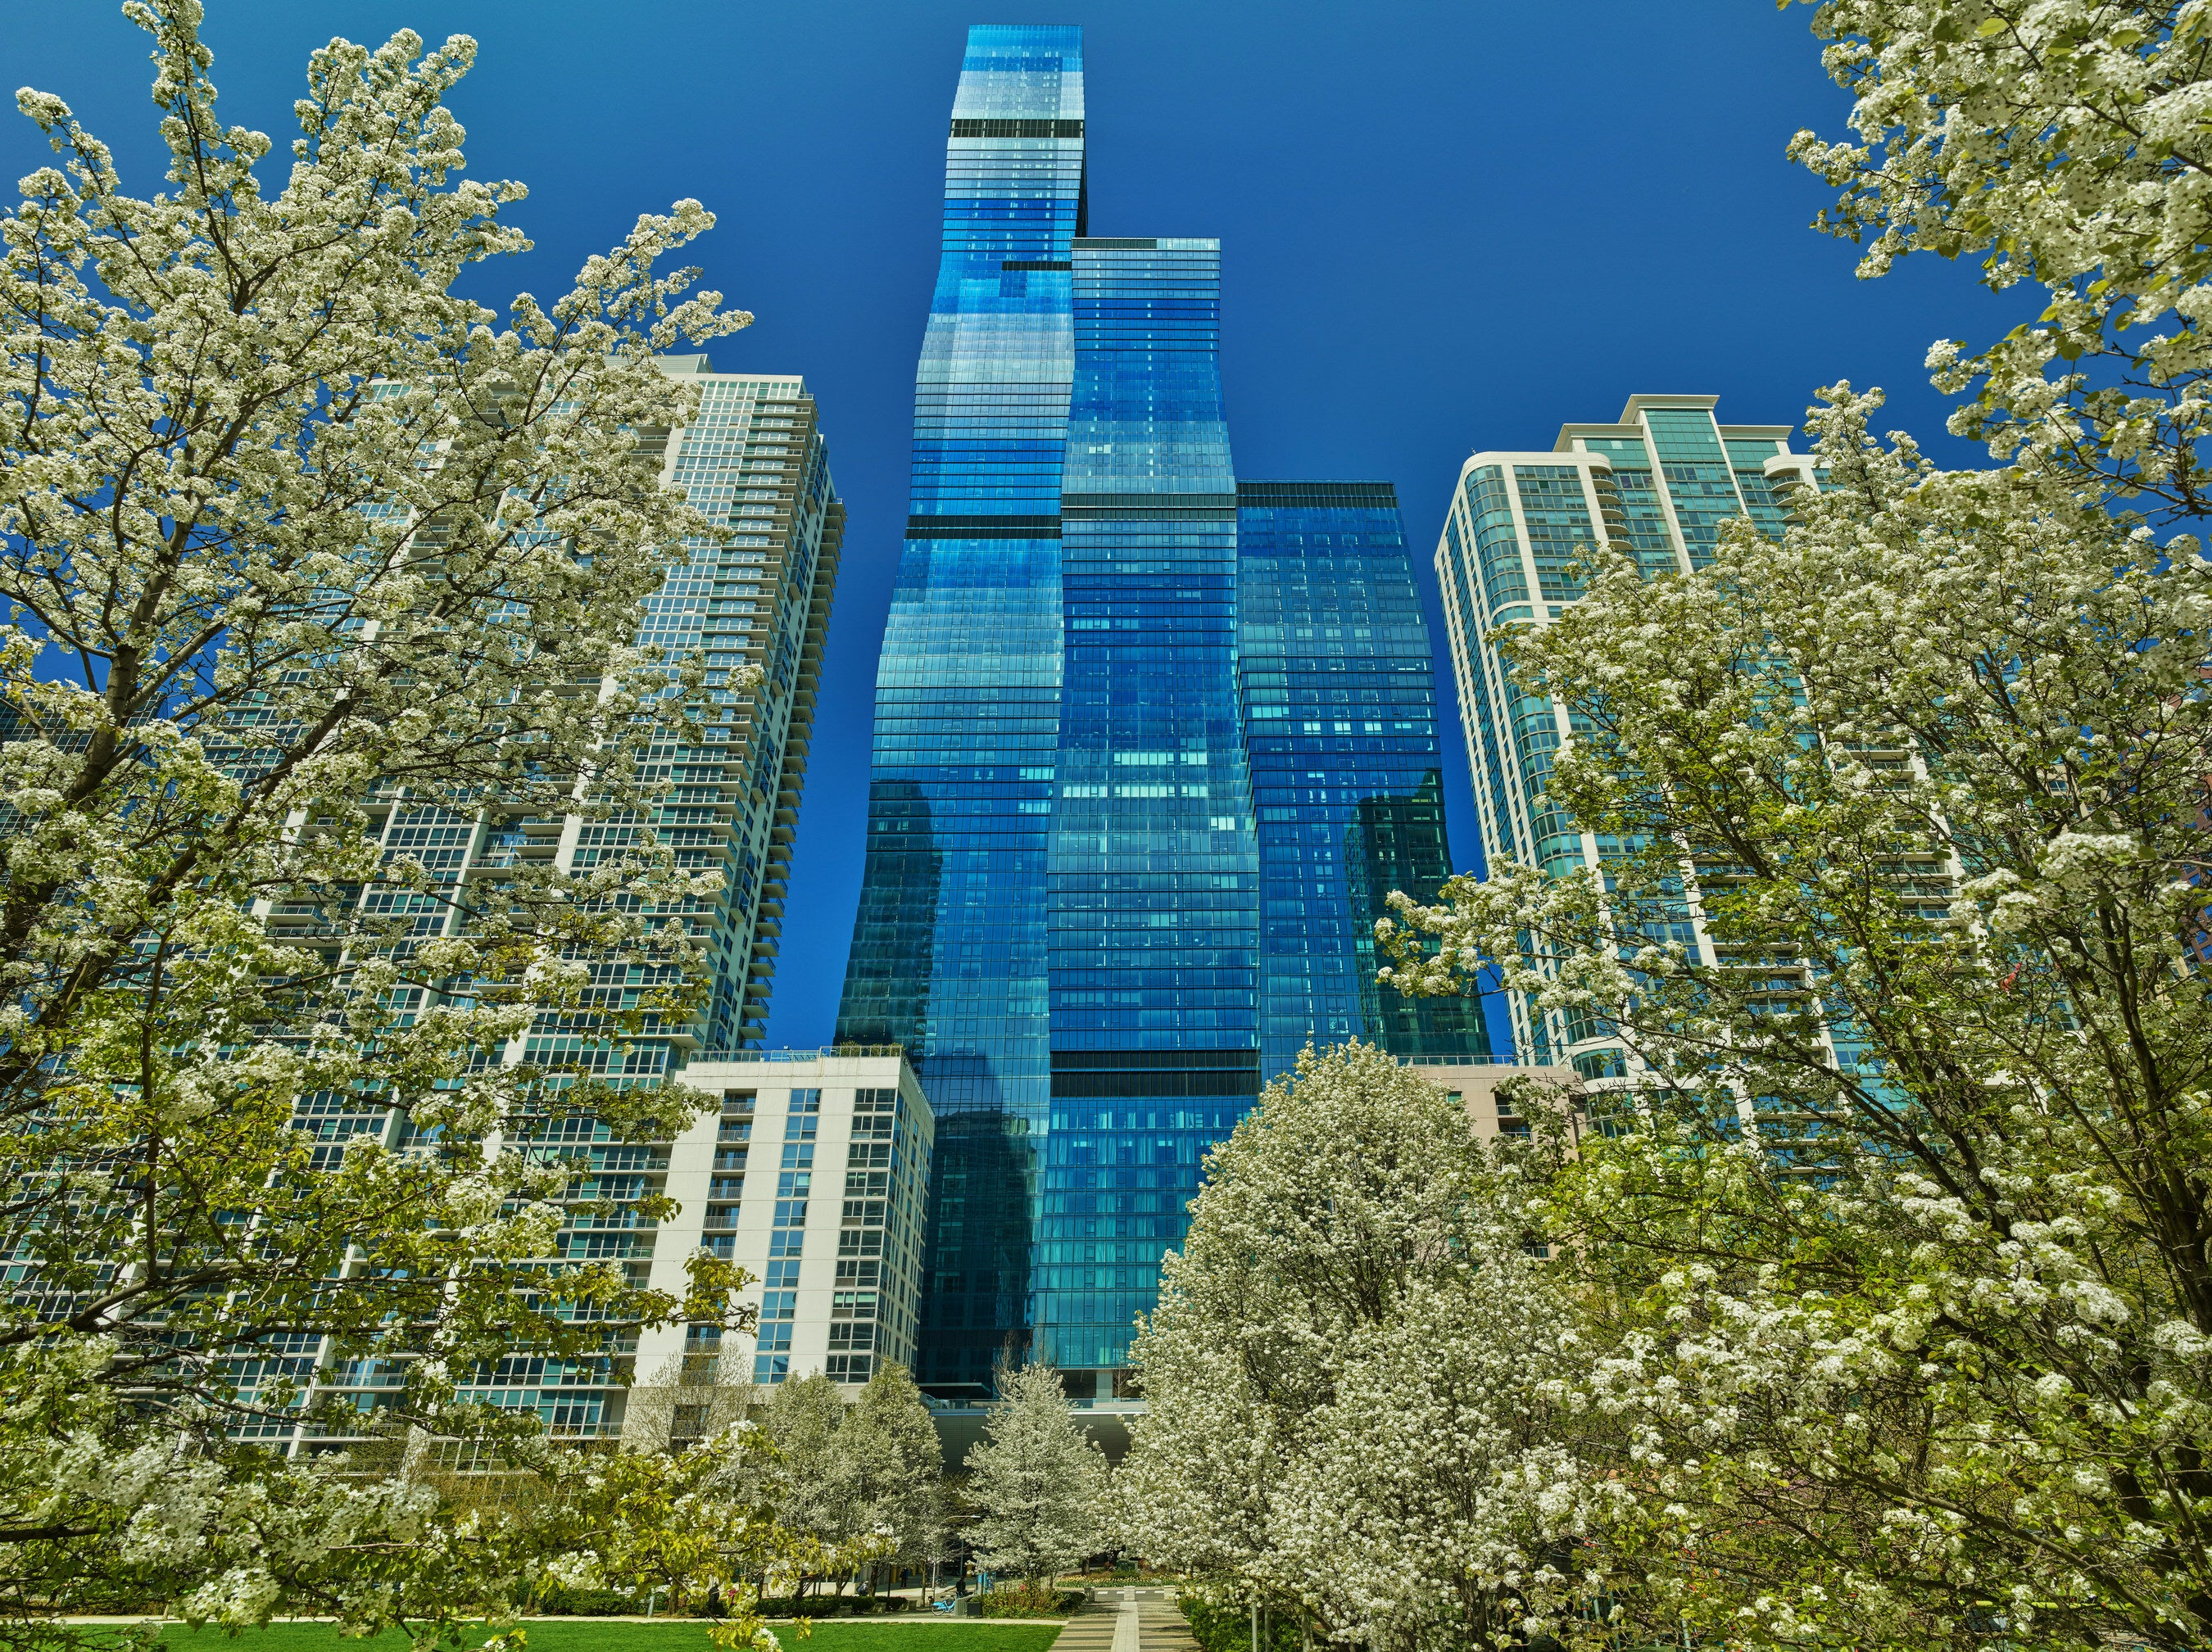 A photo of the front of St. Regis Chicago surrounded by trees.